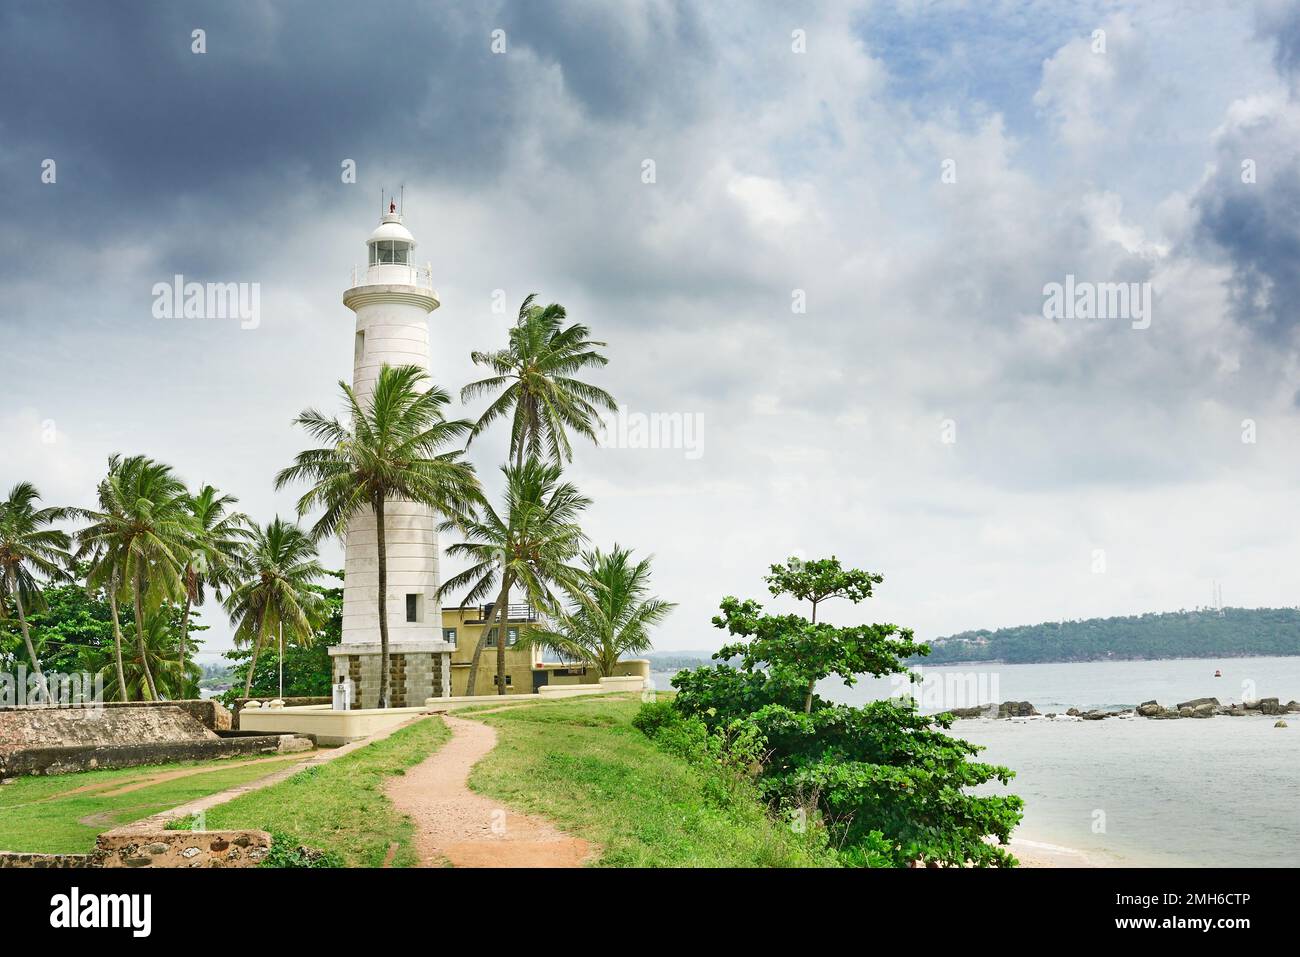 Lighthouse and palm trees on background sky. Stock Photo